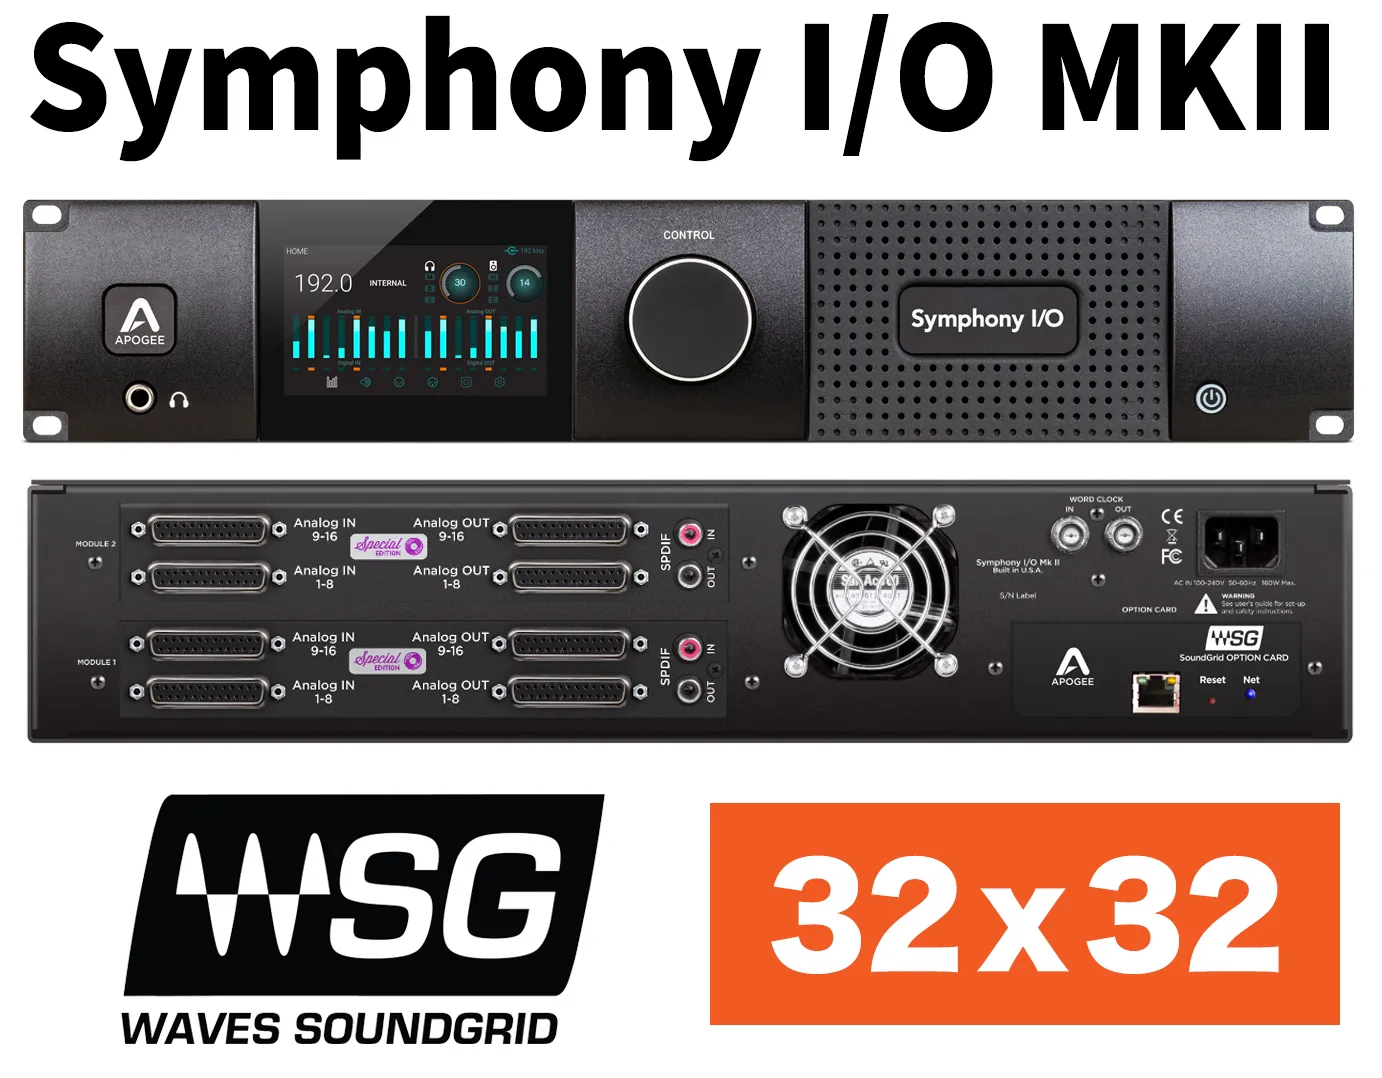 Symphony I/O MKII Sound Grid Chassis with 16 Analog In + 16 Analog Out+16 Analog In + 16 Analog Out